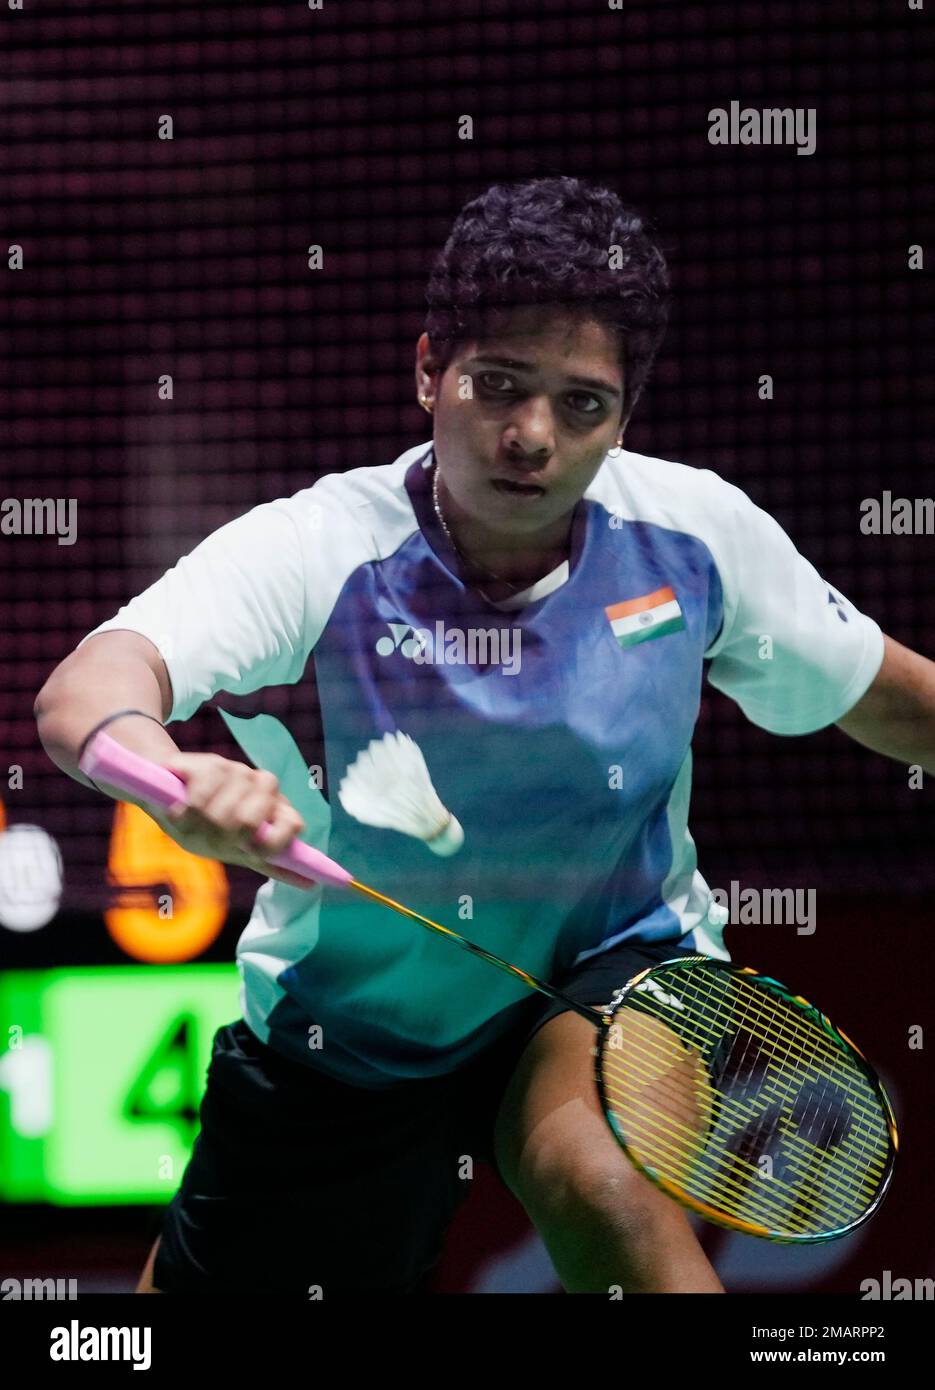 Treesa Jolly of India, with Gayatri Gopichand Pullela, plays a return during a badminton game of the womens doubles against Low Yeen Yuan of Malaysia and Valeree Siow in the BWF World